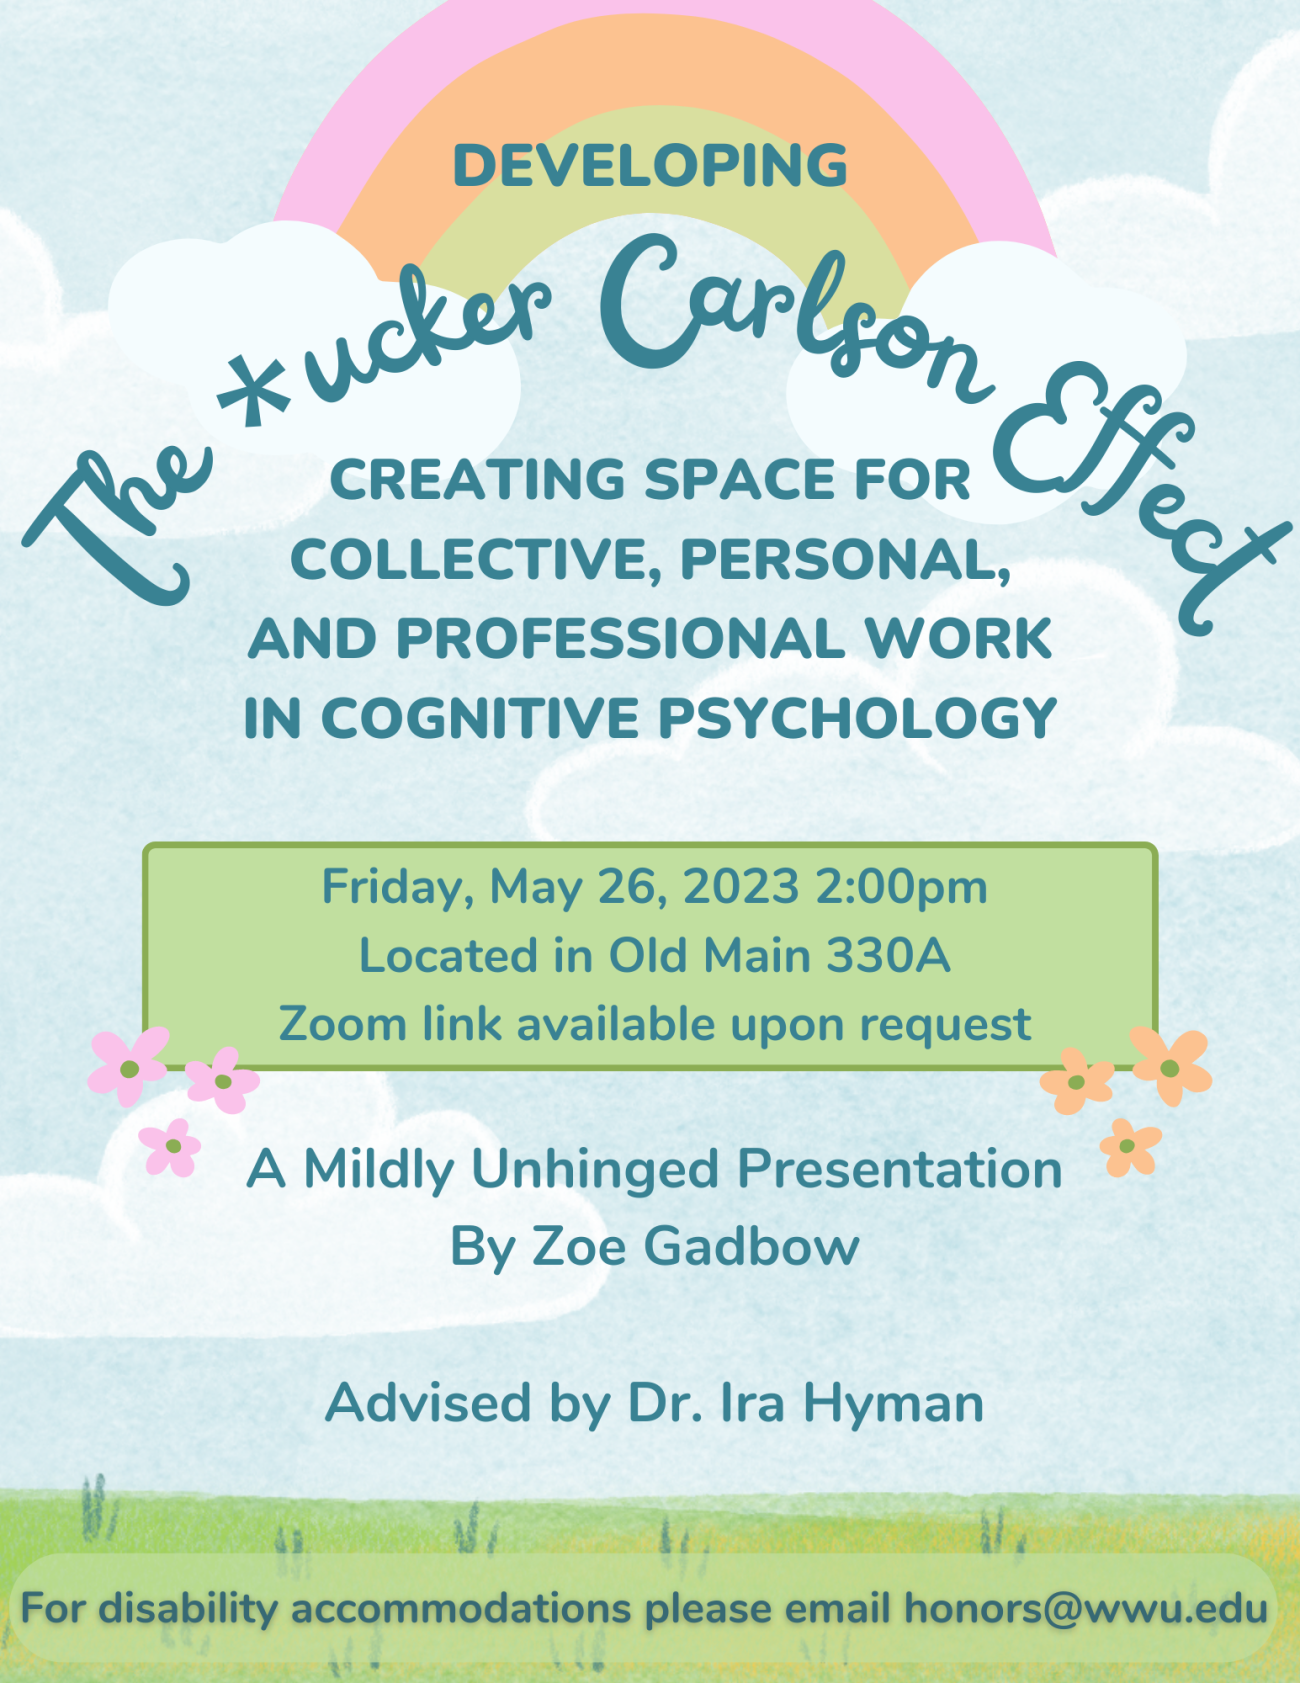 "The flyer has a blue background with clouds on the upper half and a small rainbow bridging the space between the clouds. Curling cursive text in front of the rainbow and clouds reads ""Developing the *ucker Carlson Effect"".  Under (the middle half of the poster directly under the previously mentioned text (in all caps) there is more text which reads ""Creating Space for Collective, Personal, and Professional Work in Cognitive Psychology"".